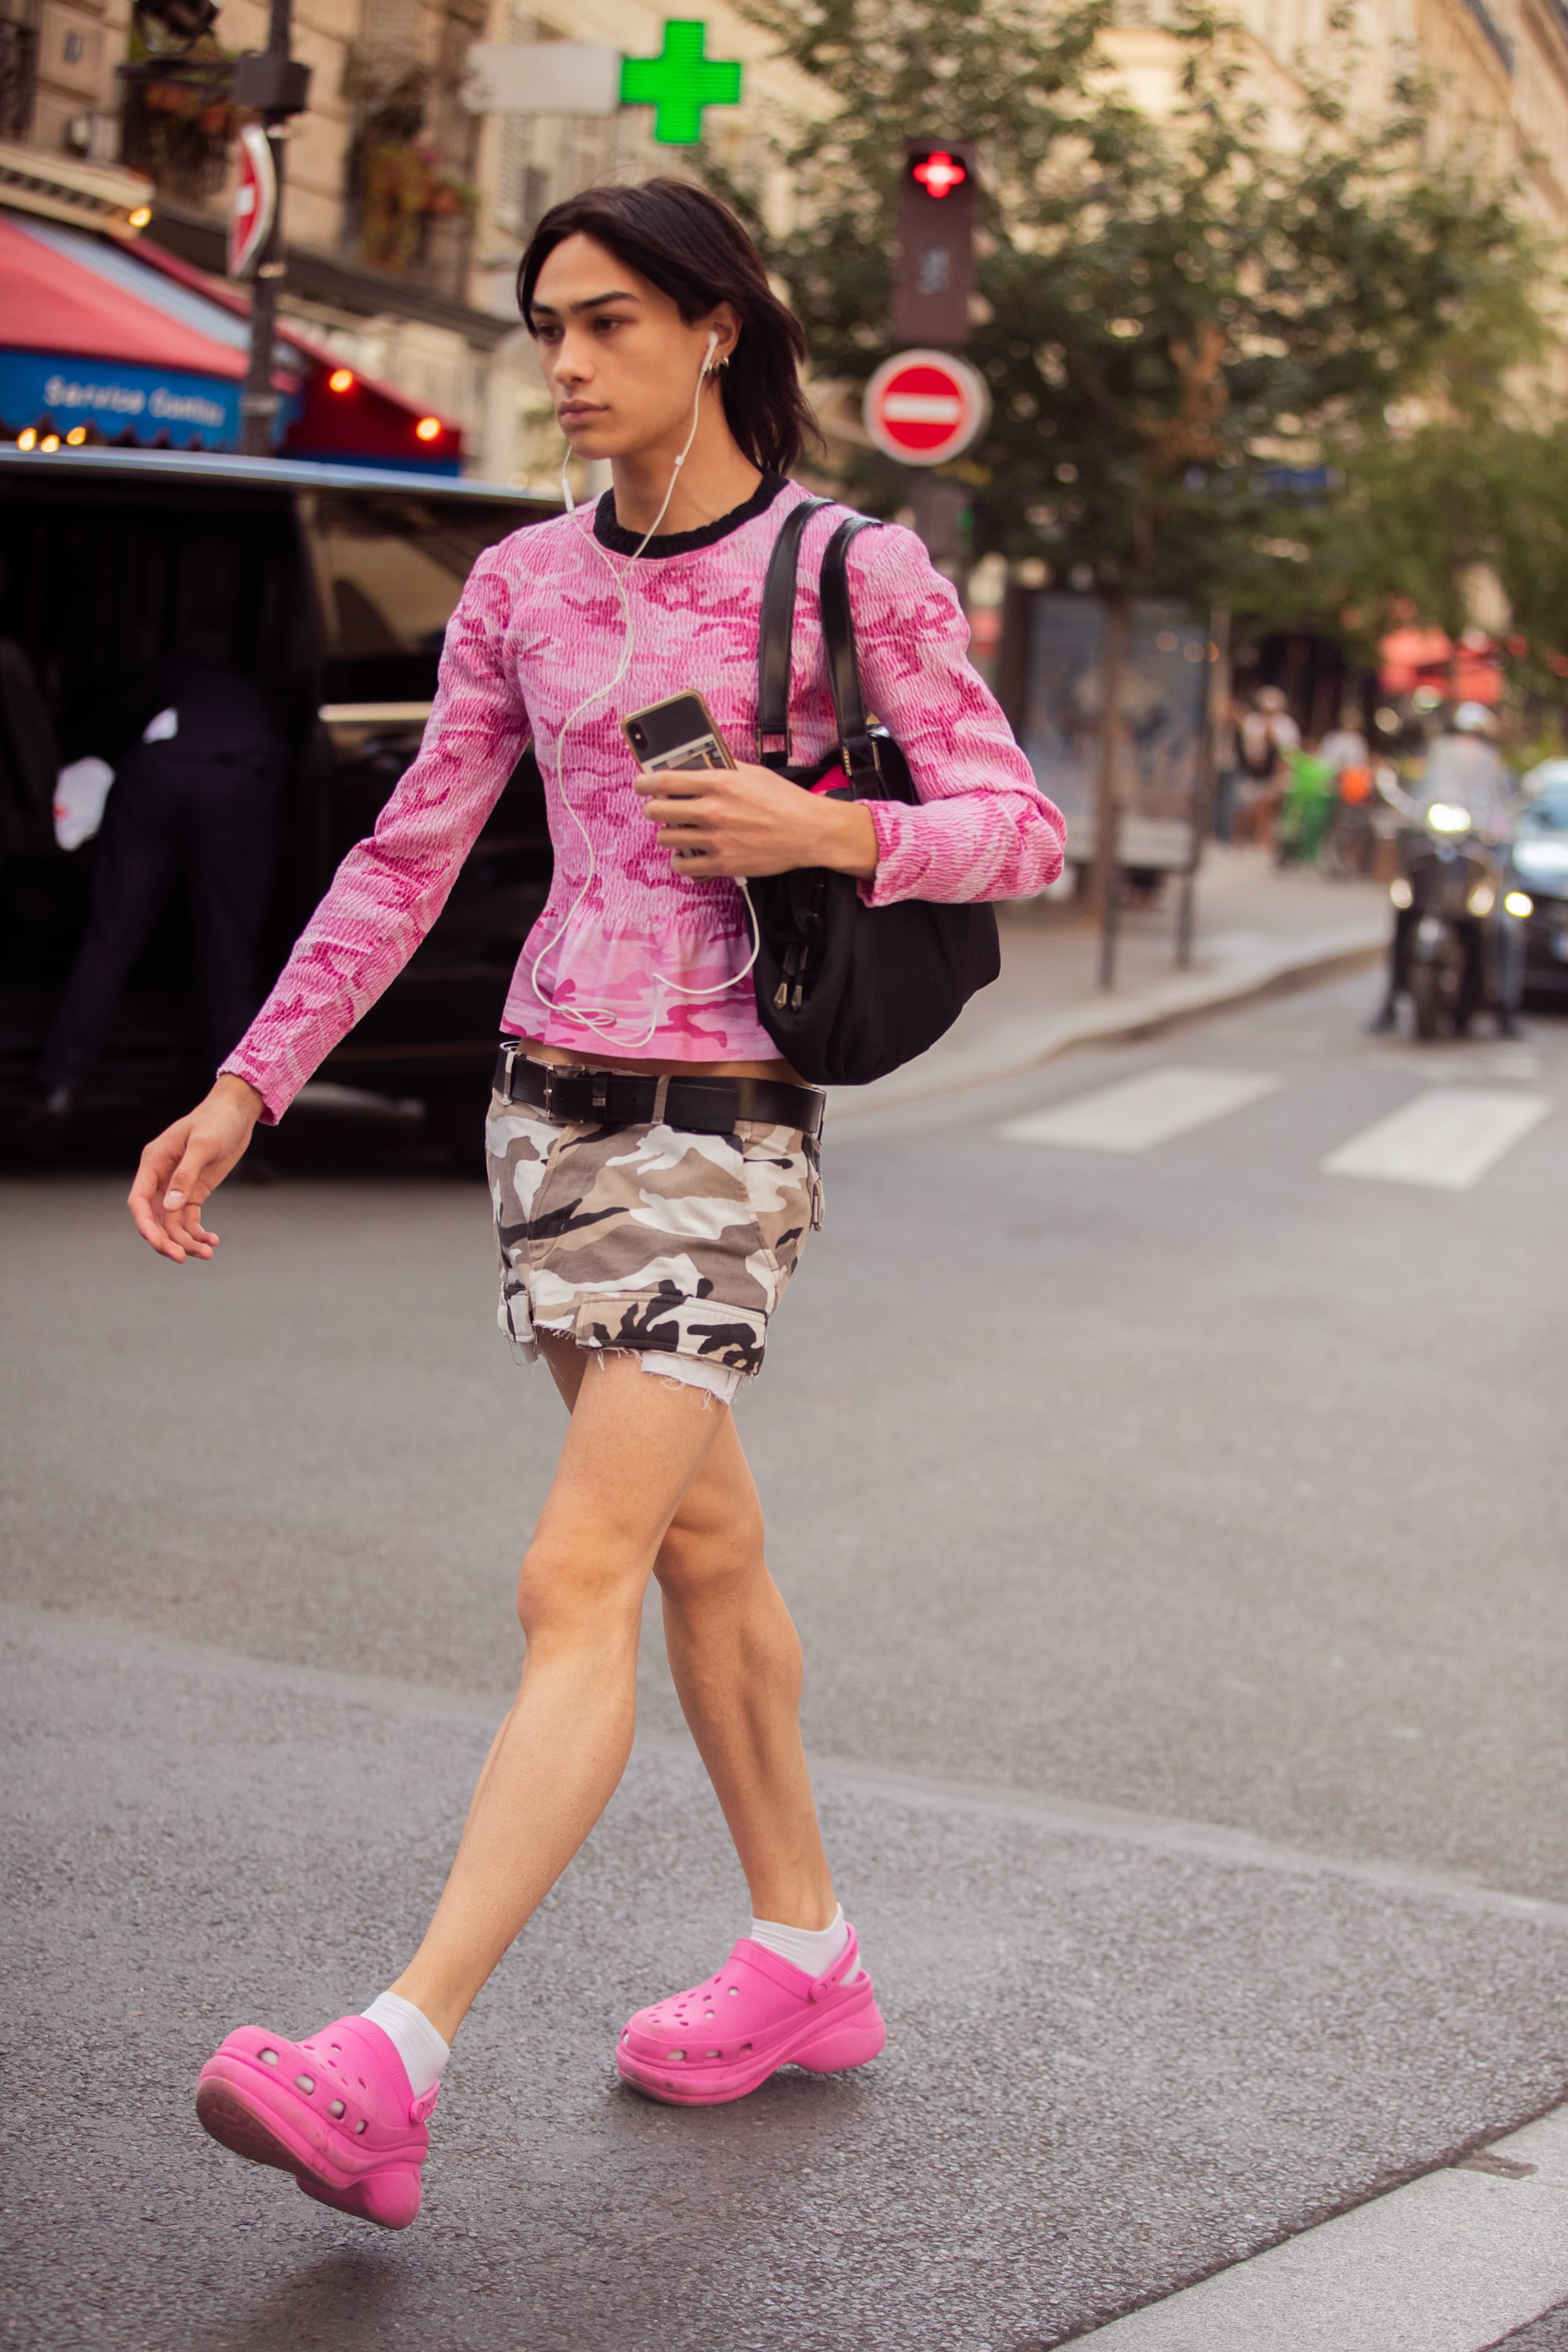 PARIS, FRANCE - JUNE 24: A guest wears a pink longsleeve peplum knit camouflage top, low-rise gray camouflage caro mini skirt with a black belt, hot pink Crocs, and white socks during Paris Fashion Week Mens Spring/Summer 2023 on June 24, 2022 in Paris, France. (Photo by Melodie Jeng/Getty Images)